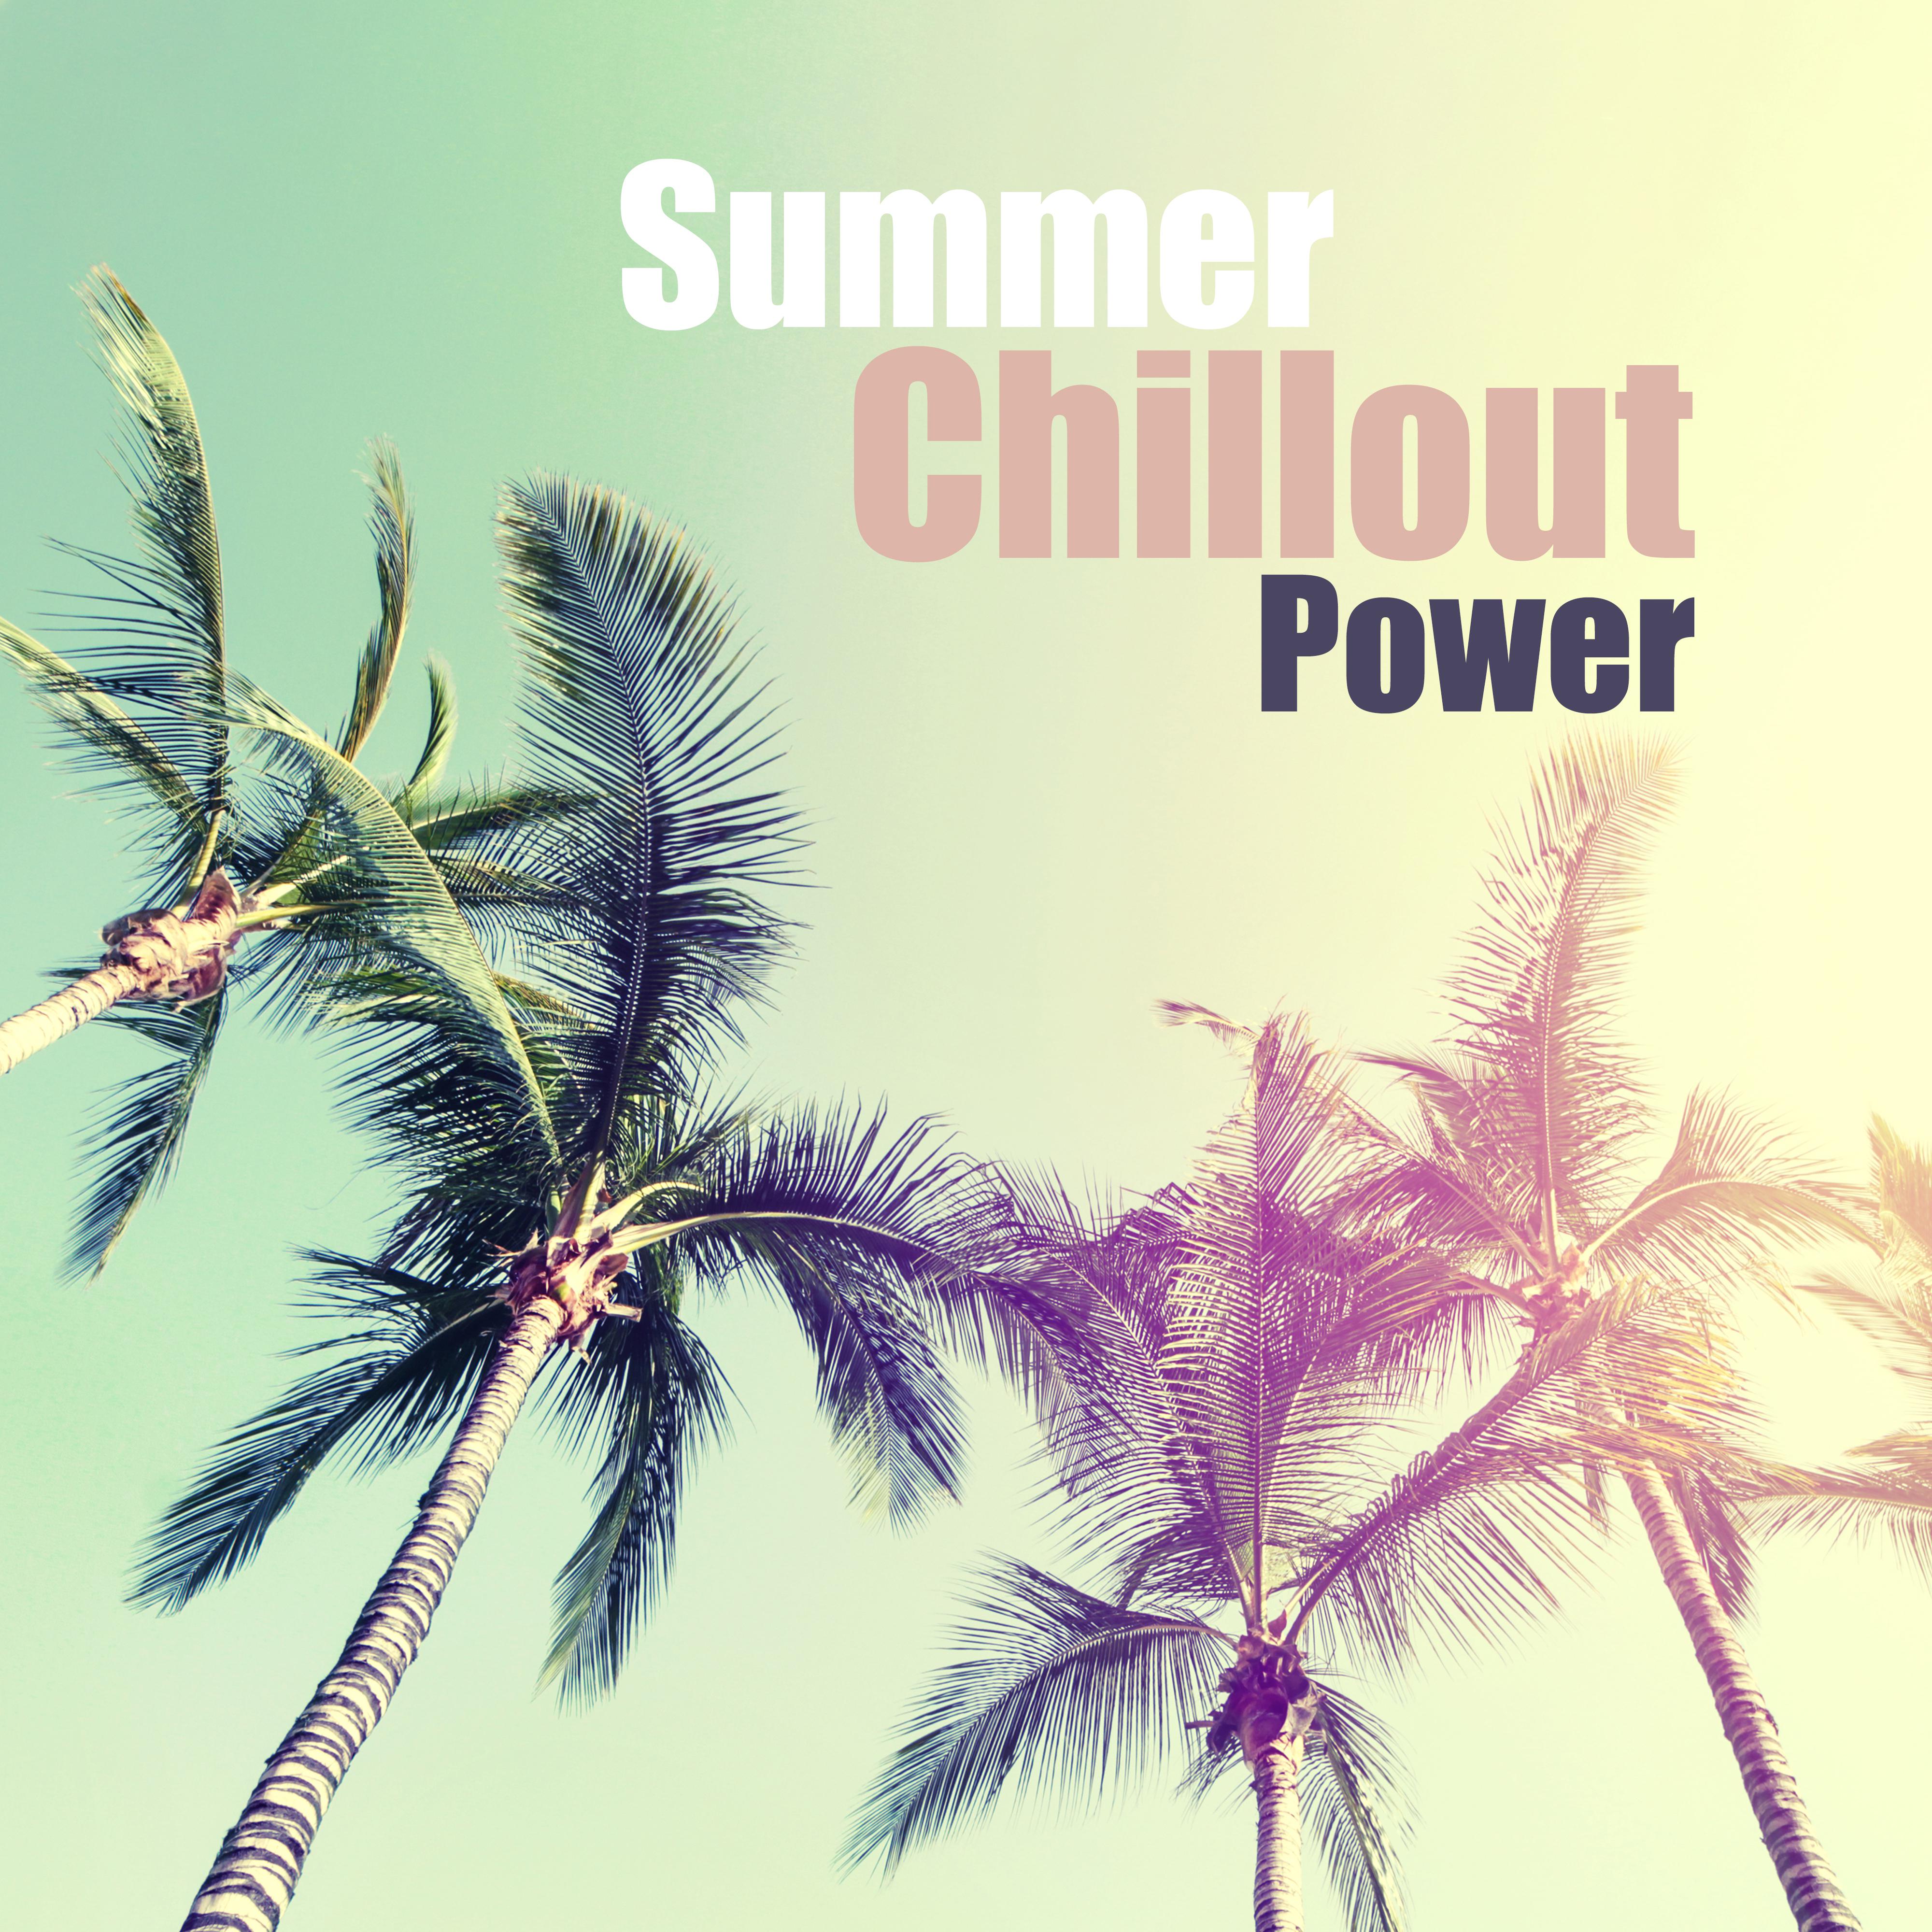 Summer Chillout Power